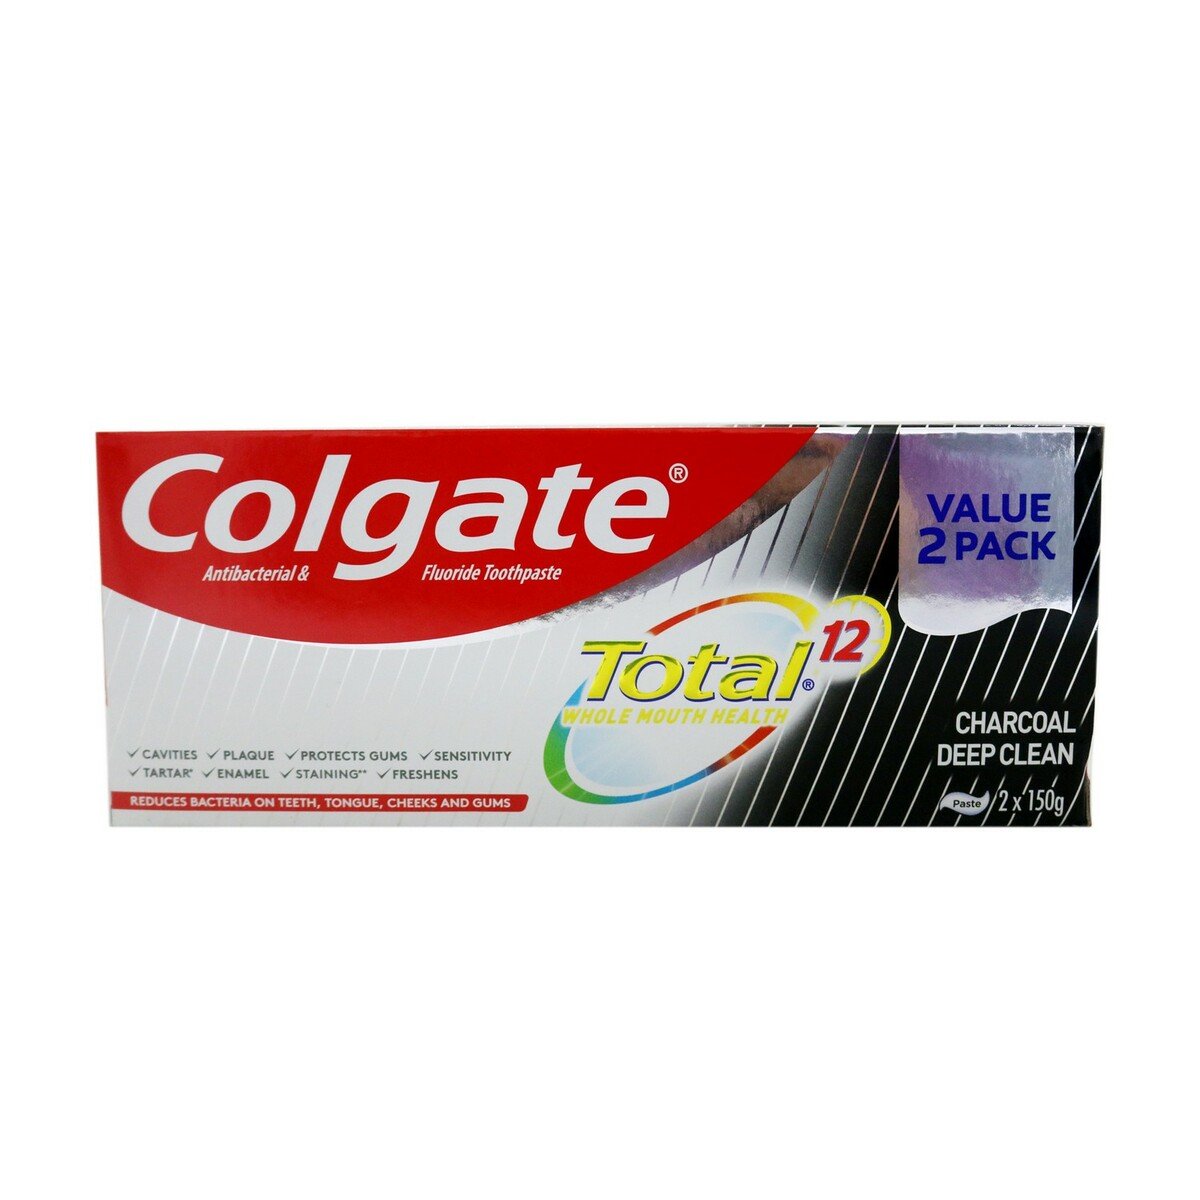 Colgate Toothpaste Total Charcol 2 X 150g